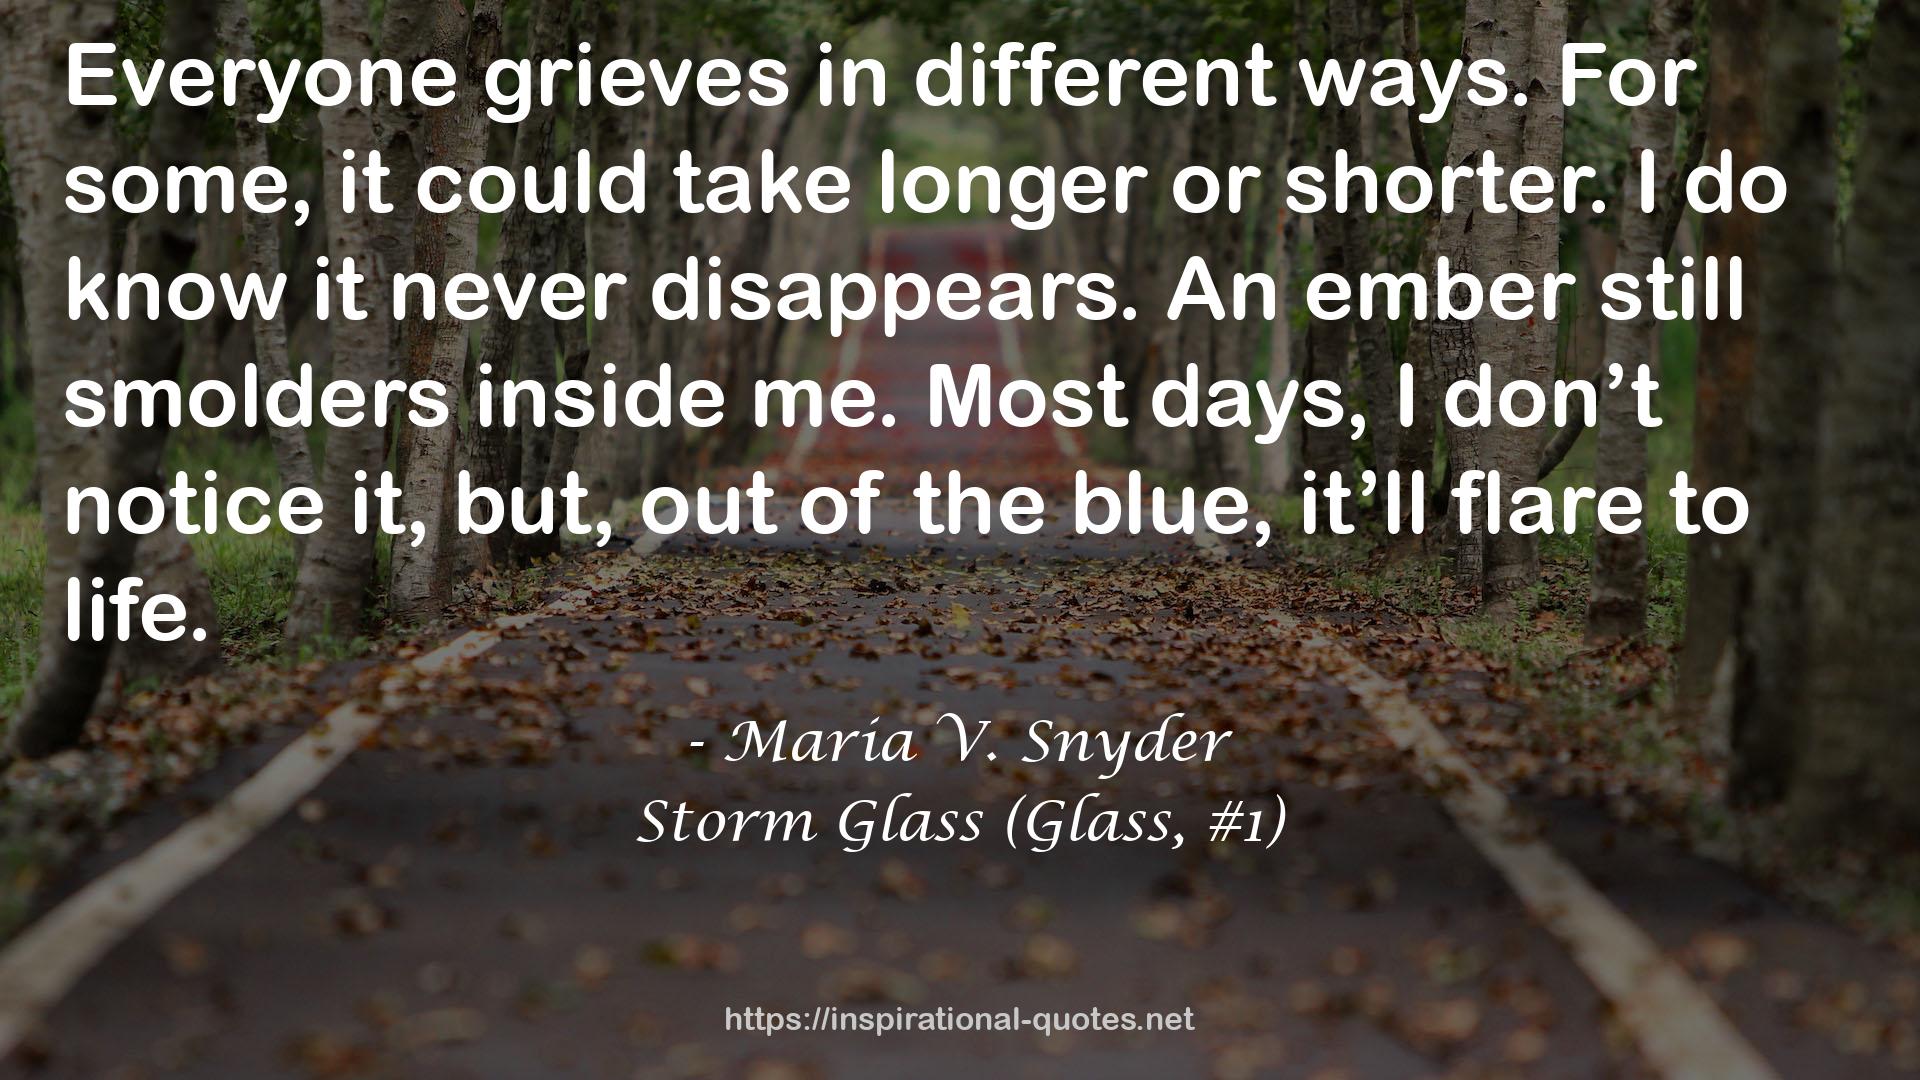 Storm Glass (Glass, #1) QUOTES